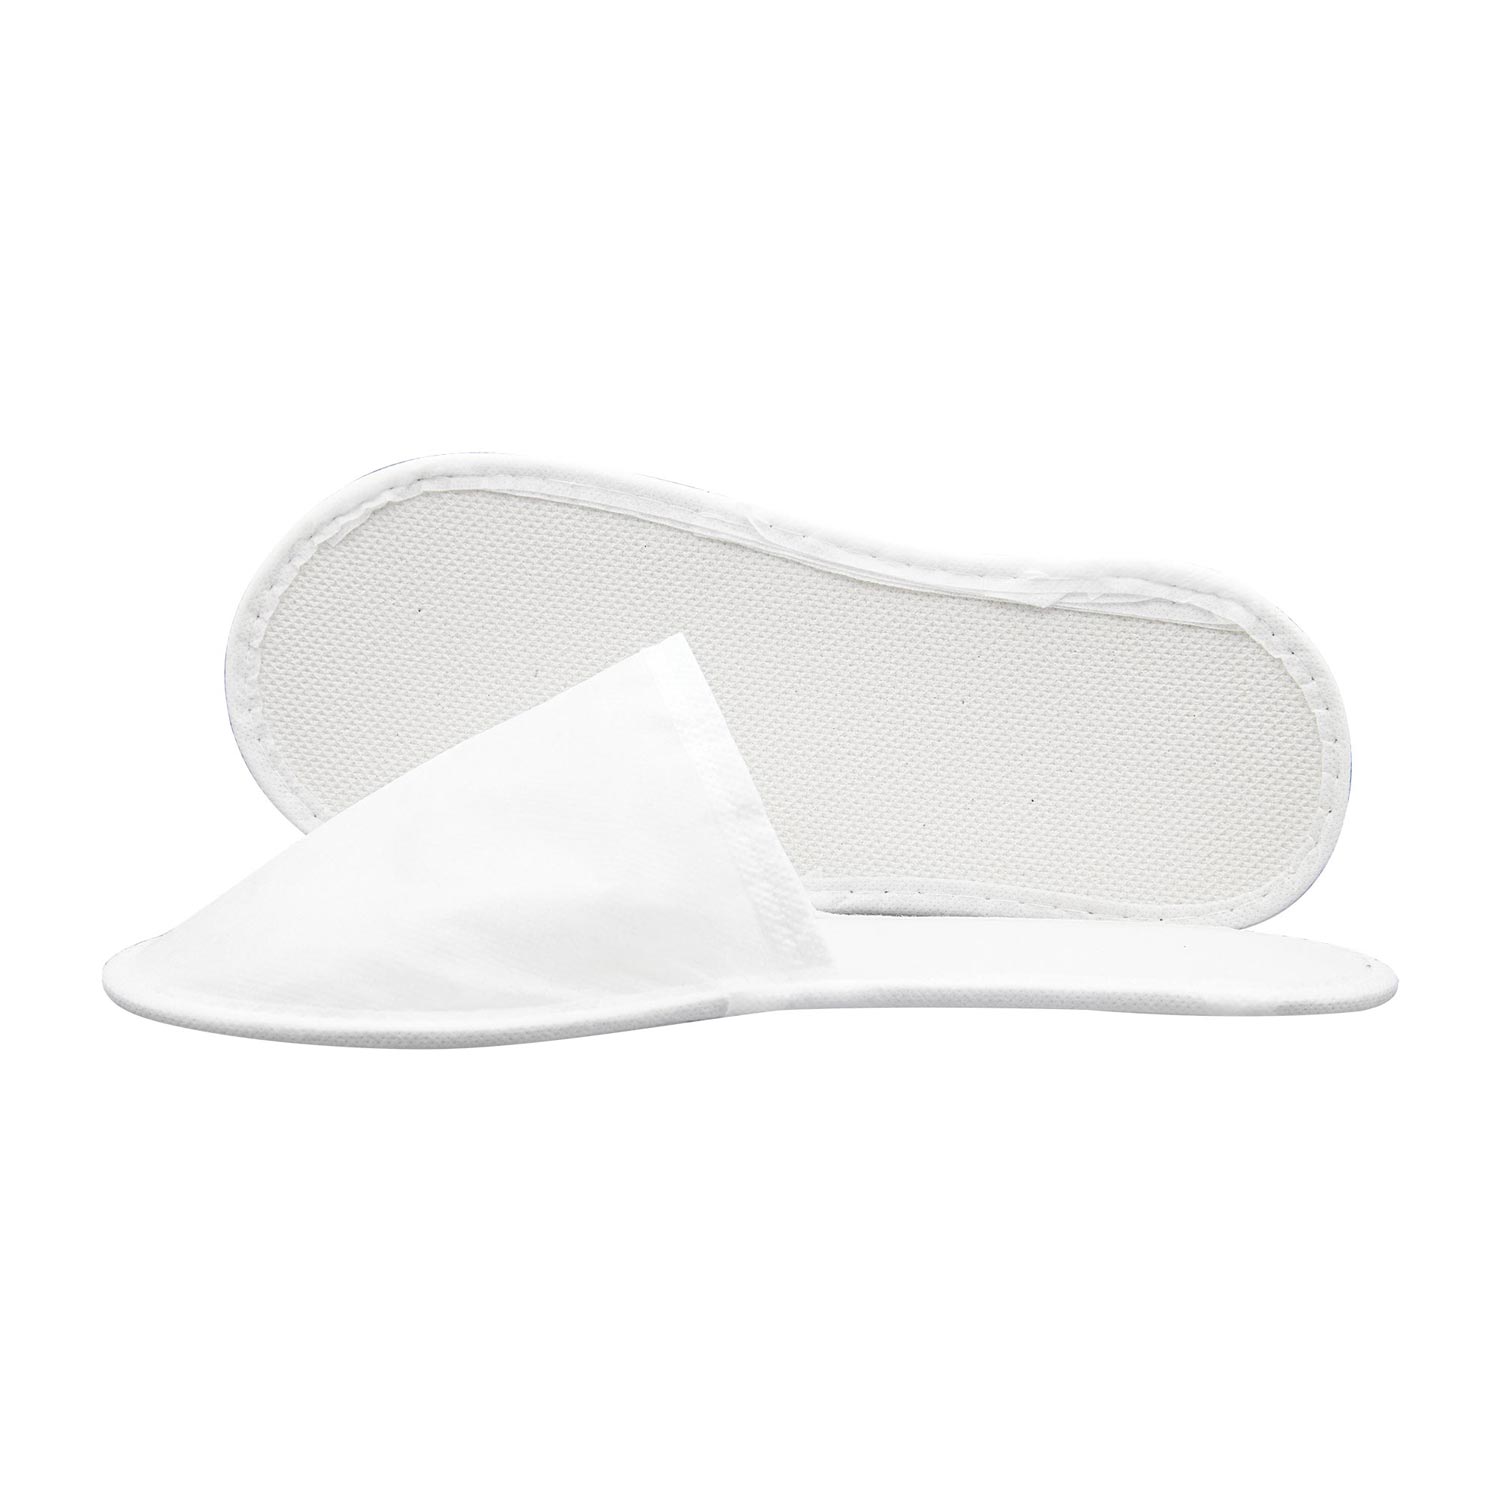 Hotel Slippers - Hotel Amenities: Hotel Slipper - Hotel Products